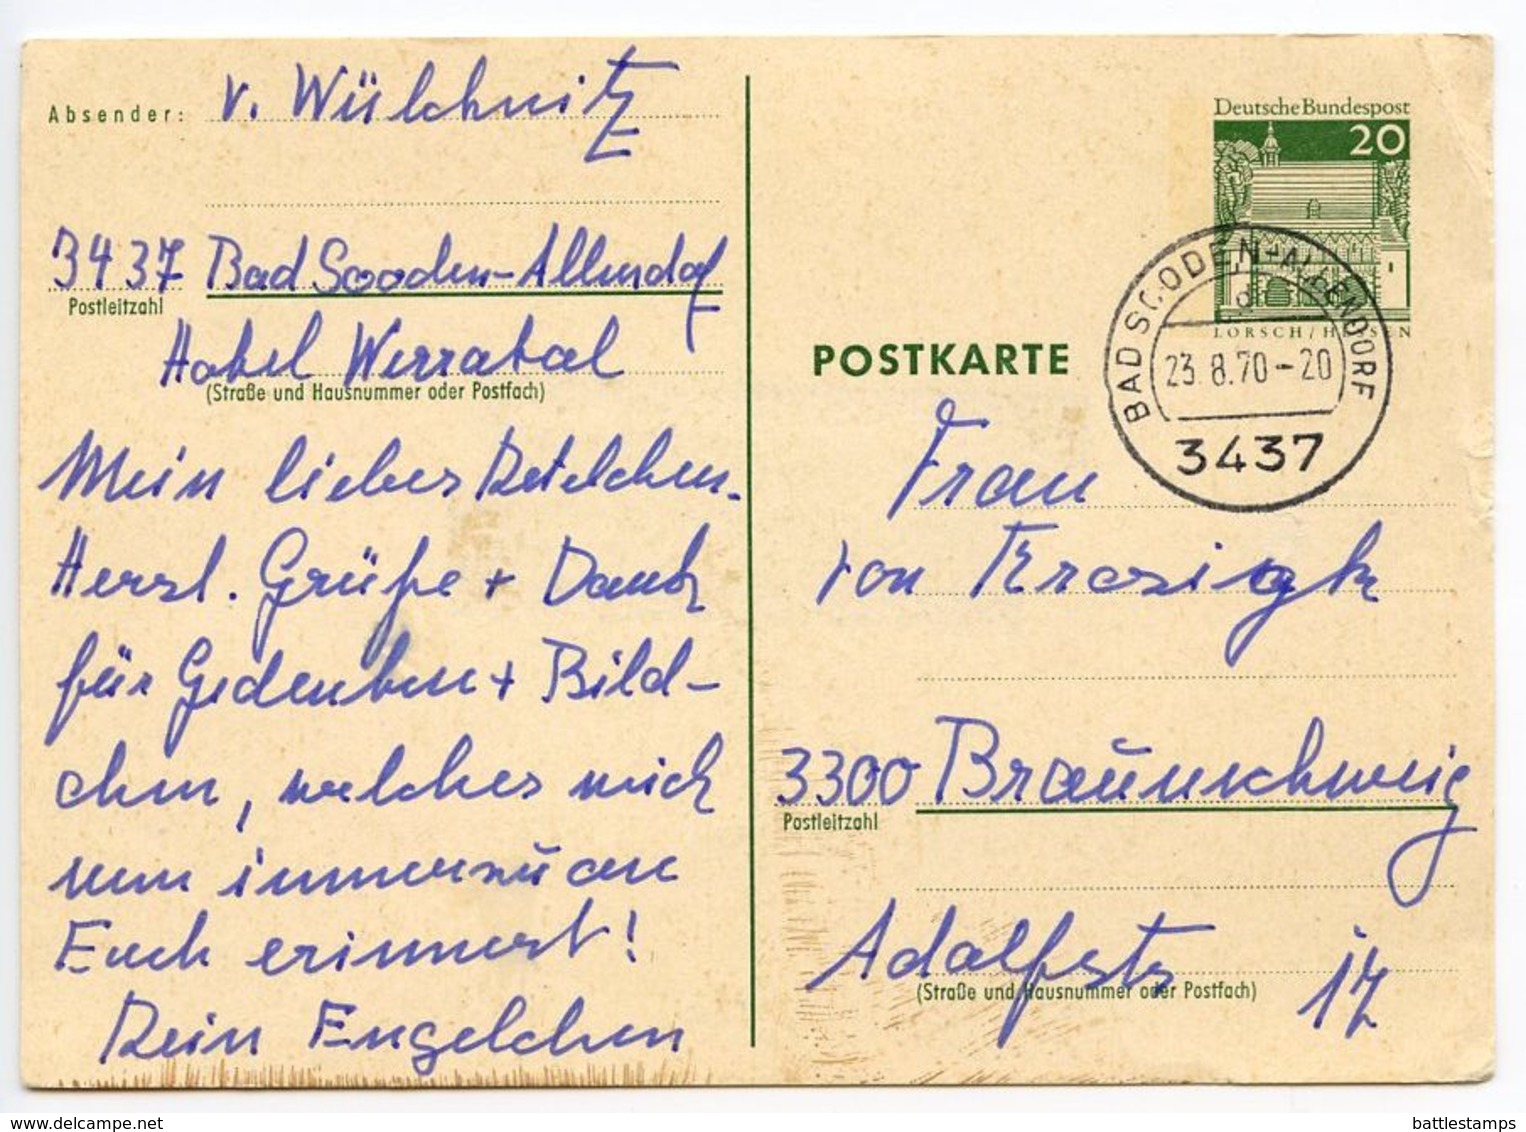 Germany 1970 20pf Postal Card Bad Sooden-Allendorf To Braunschweig - Postcards - Used